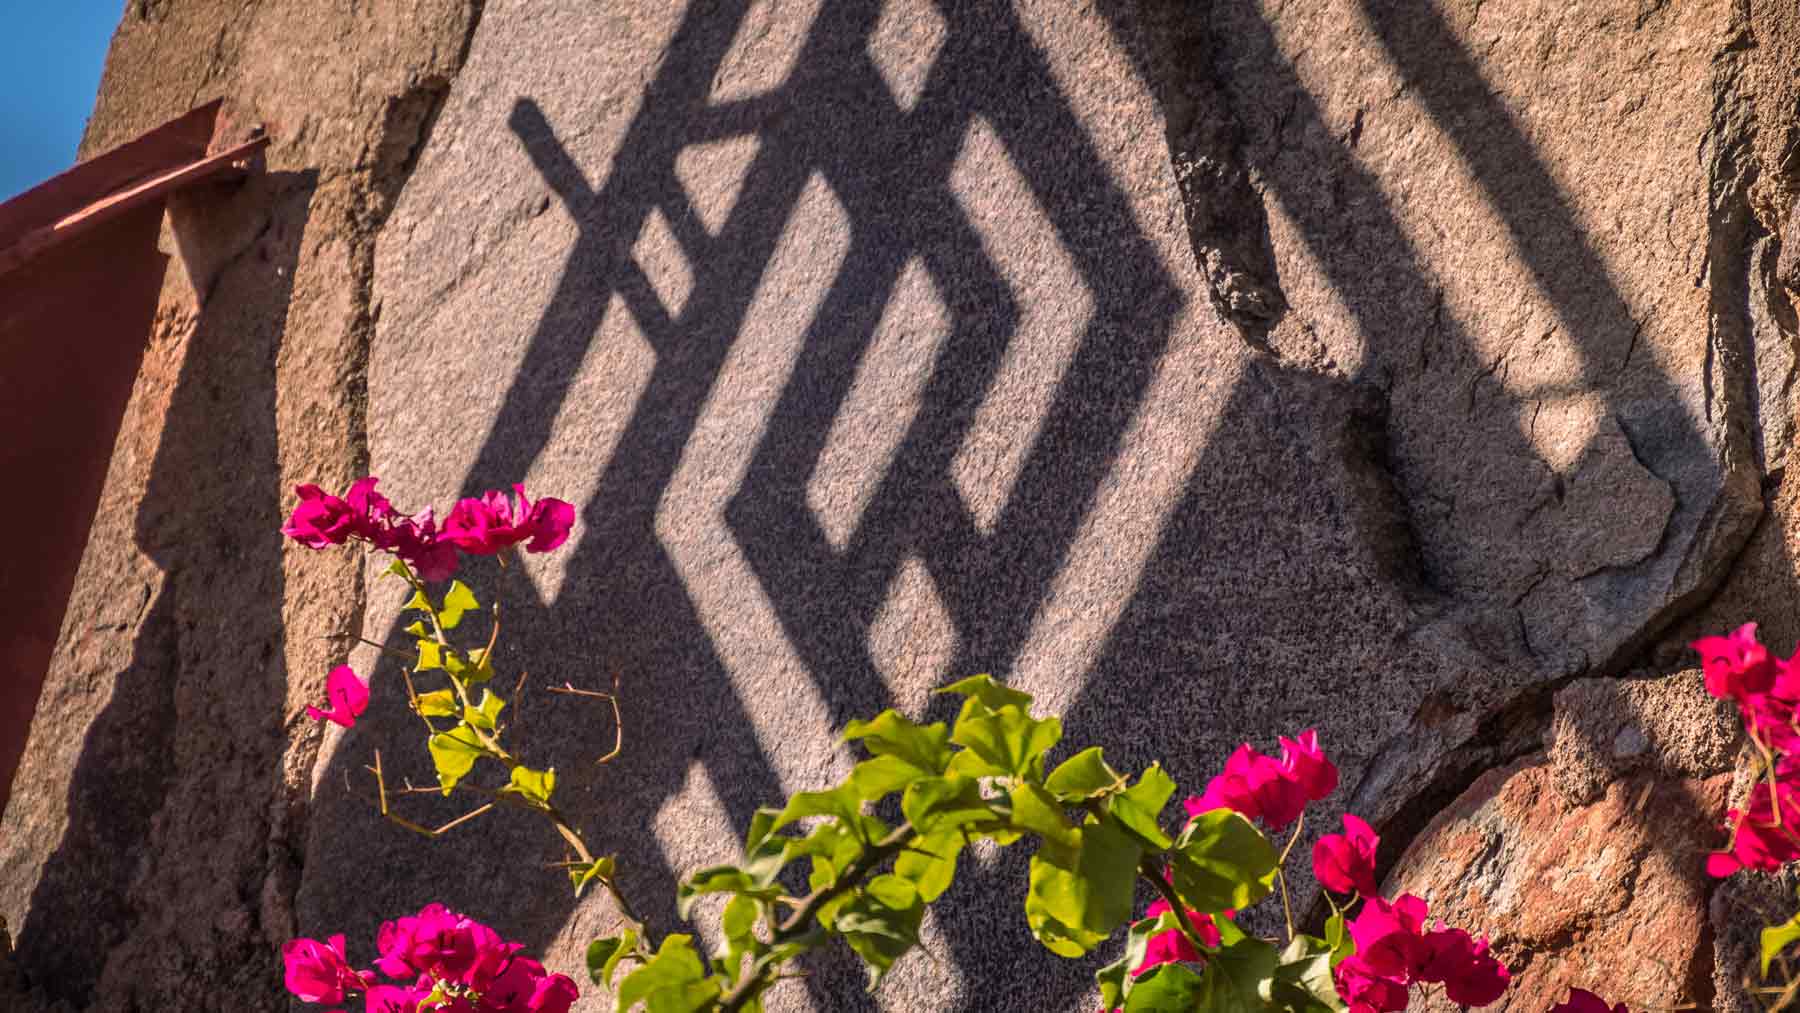 Shadow of the Taliesin West symbol on a wall